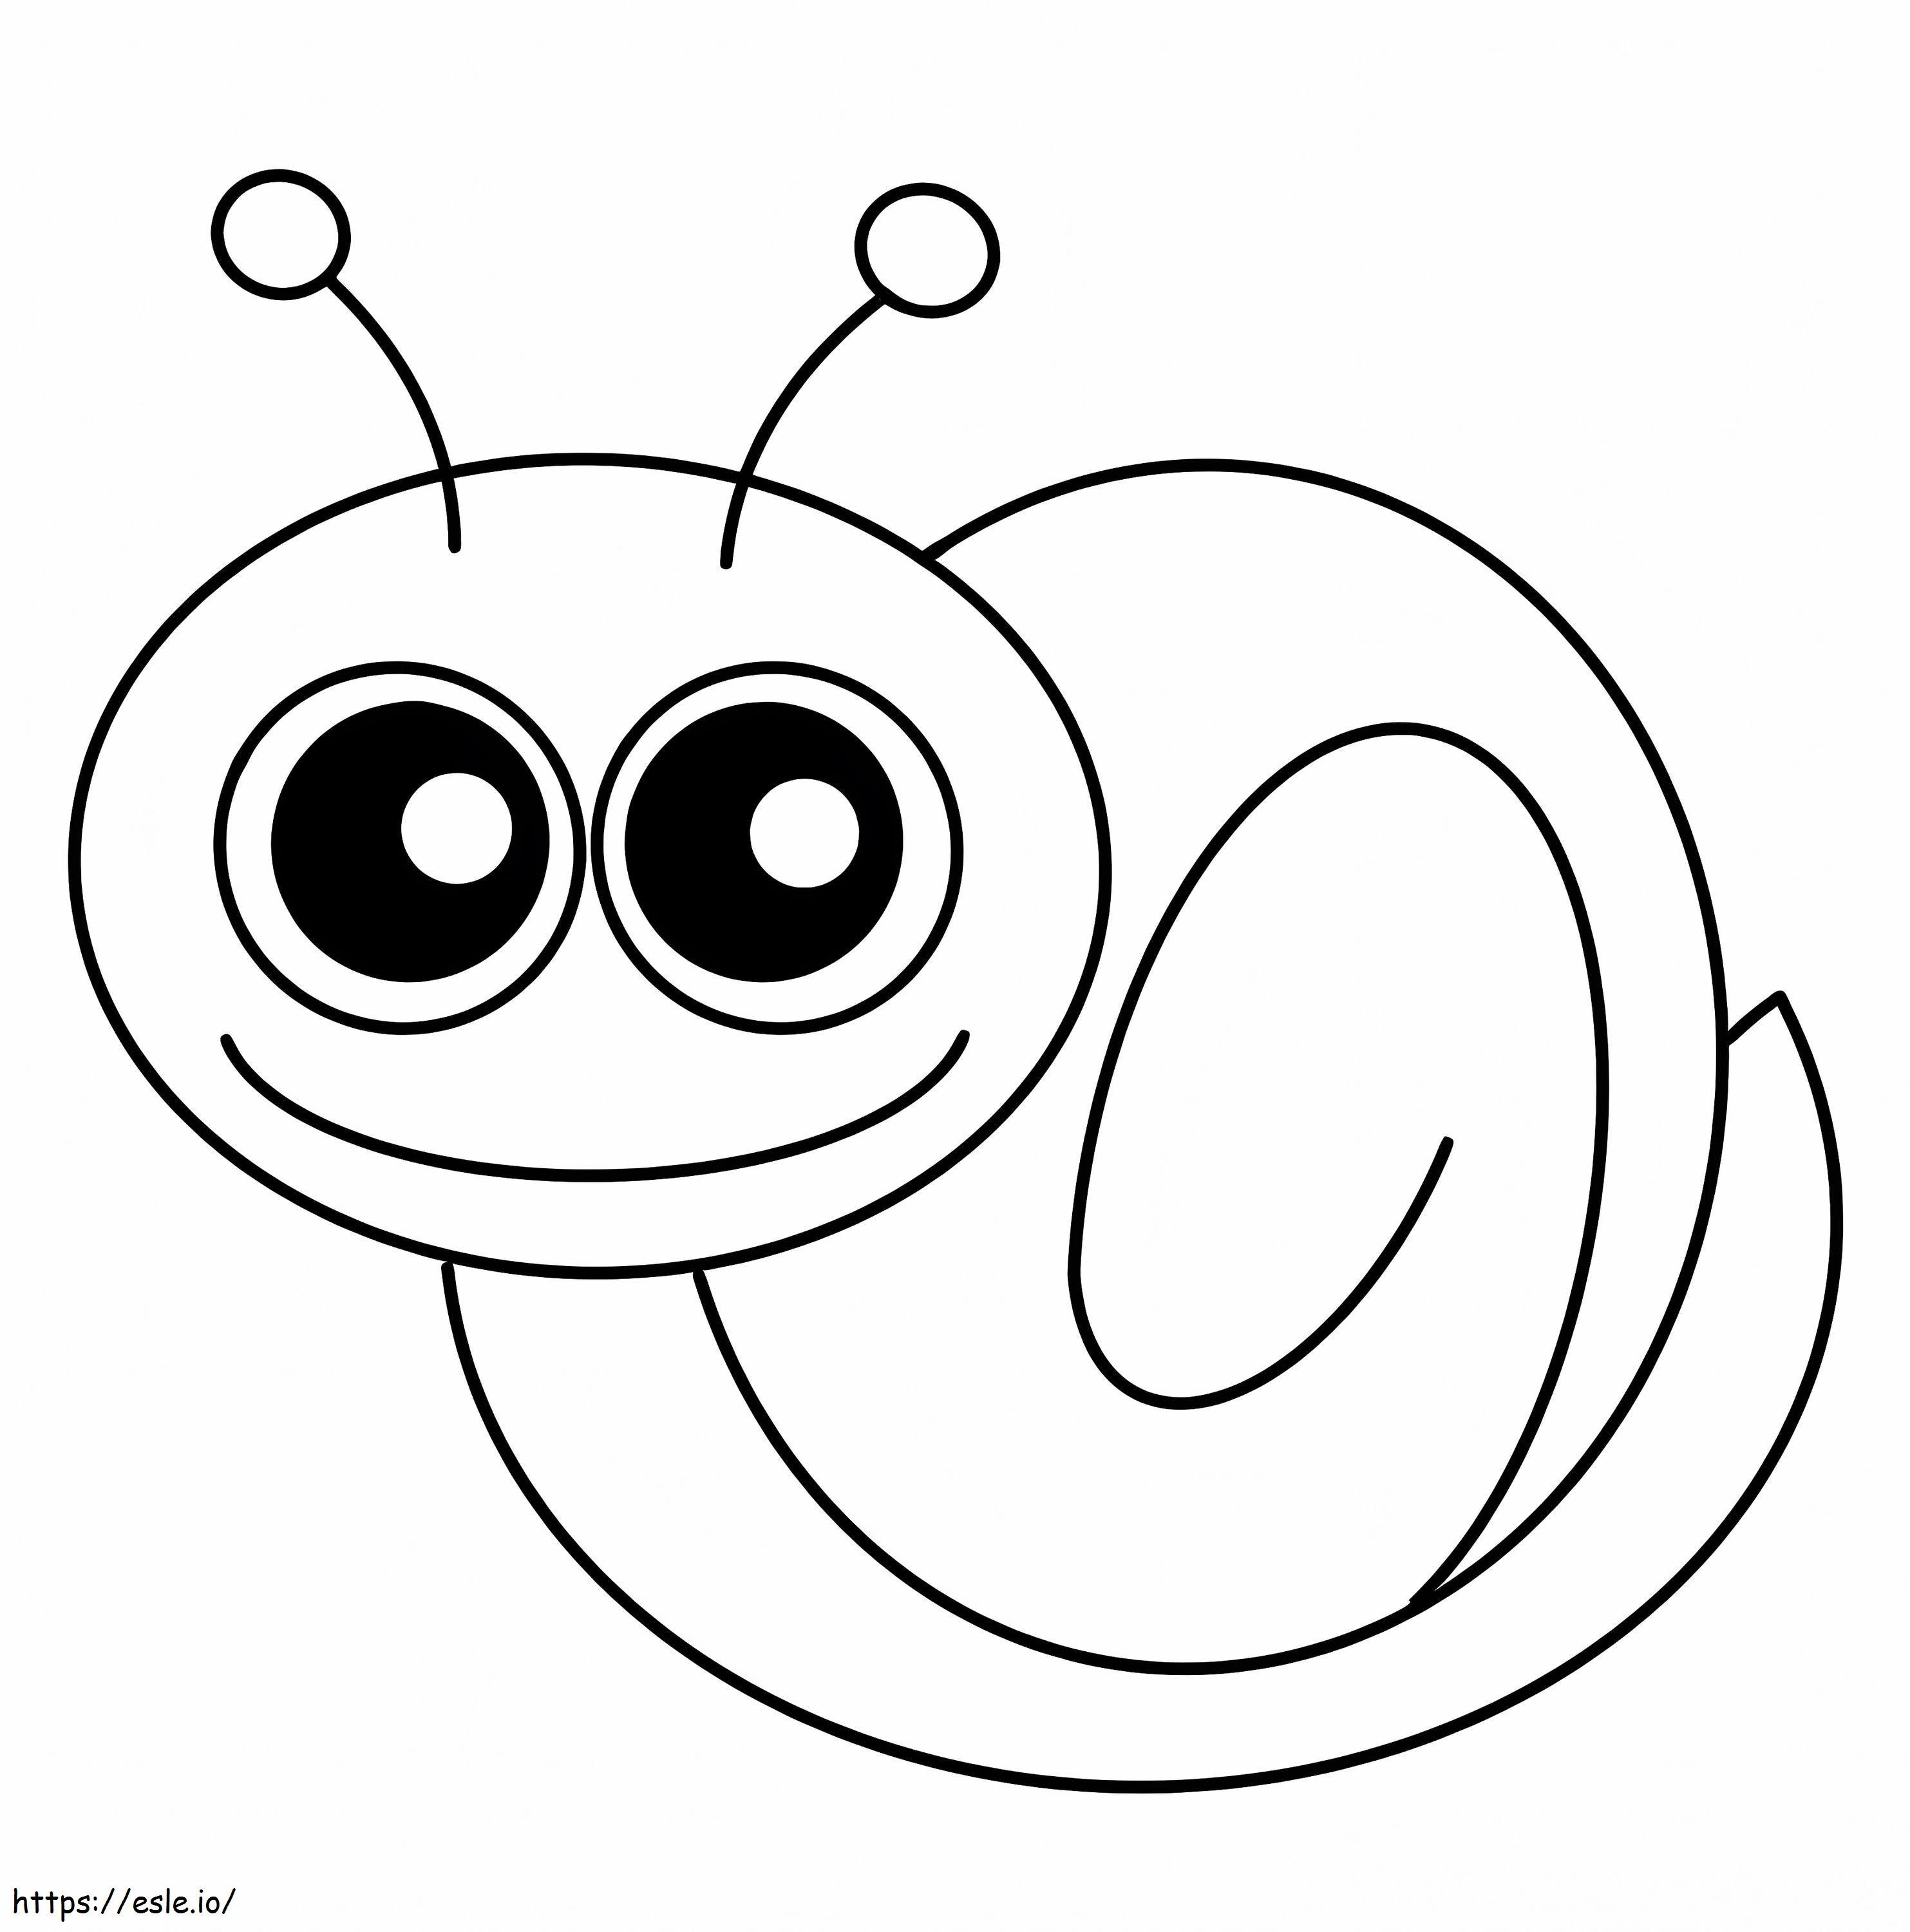 Smiling Cartoon Snail coloring page